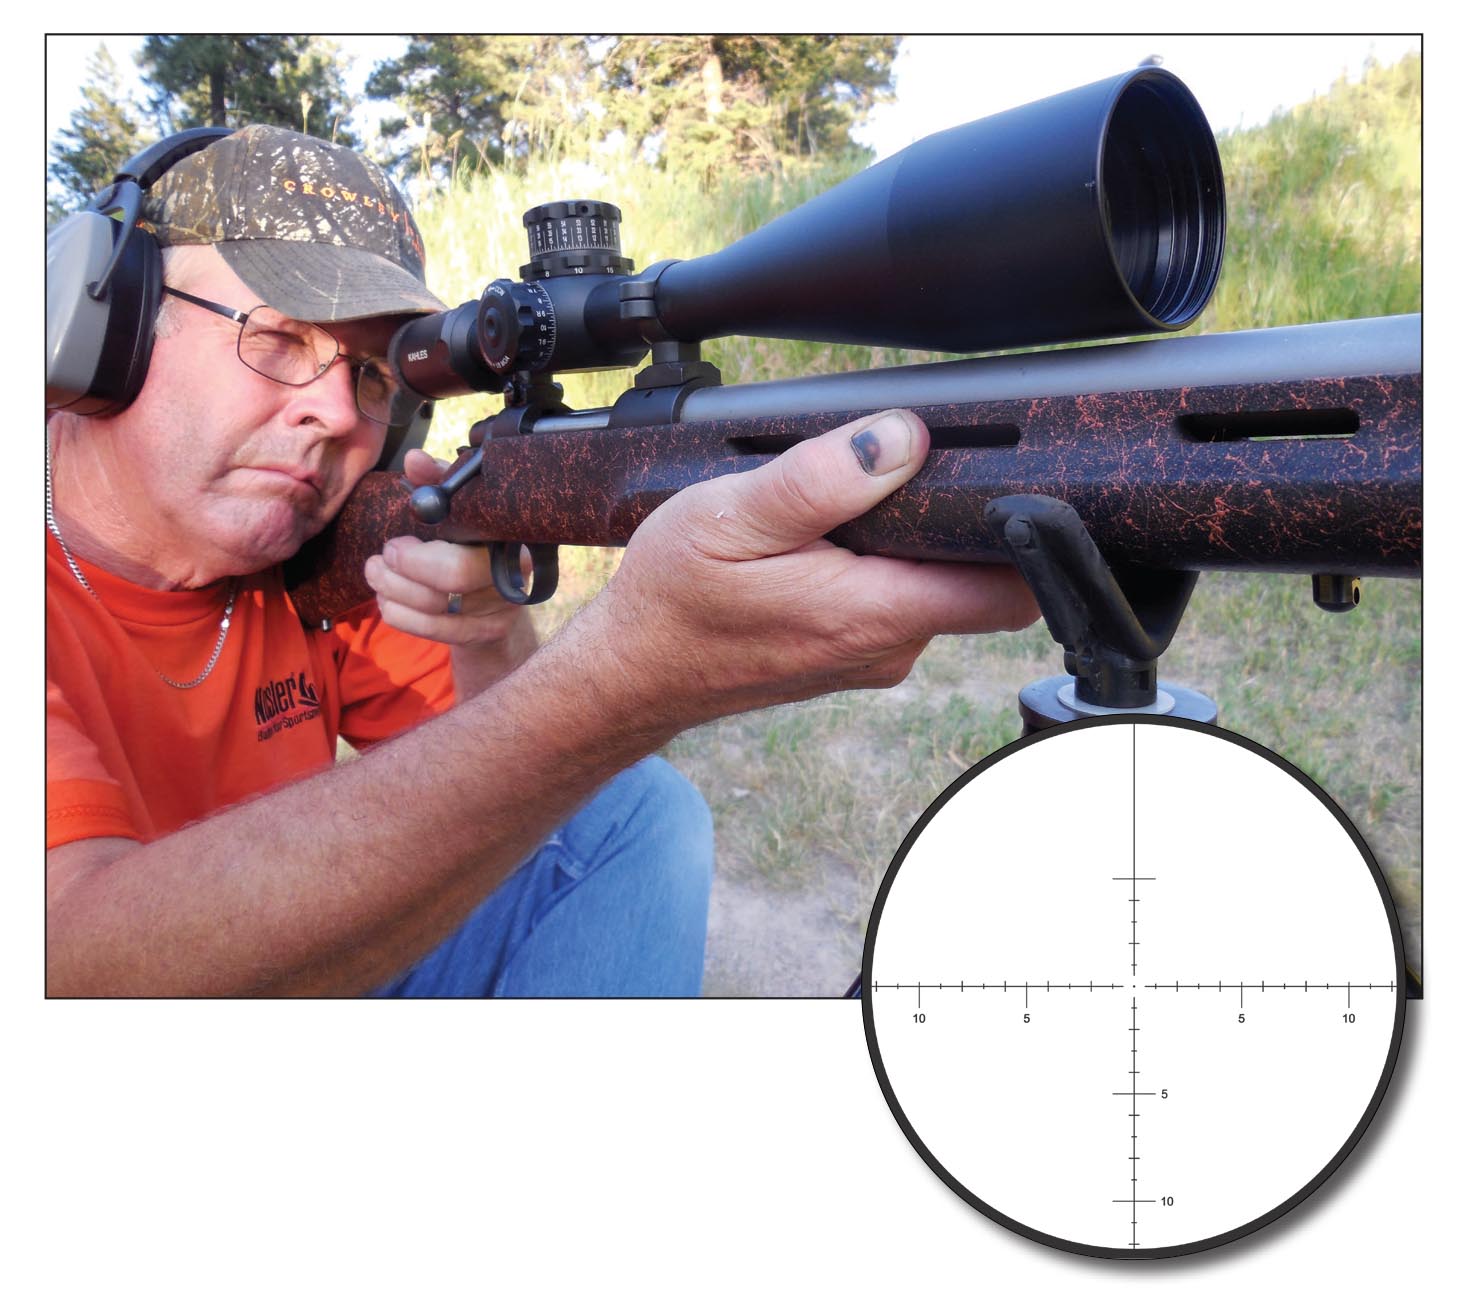 The Kahles K 1050 10-50x 56mm scope includes several features to aid in long-range shooting.